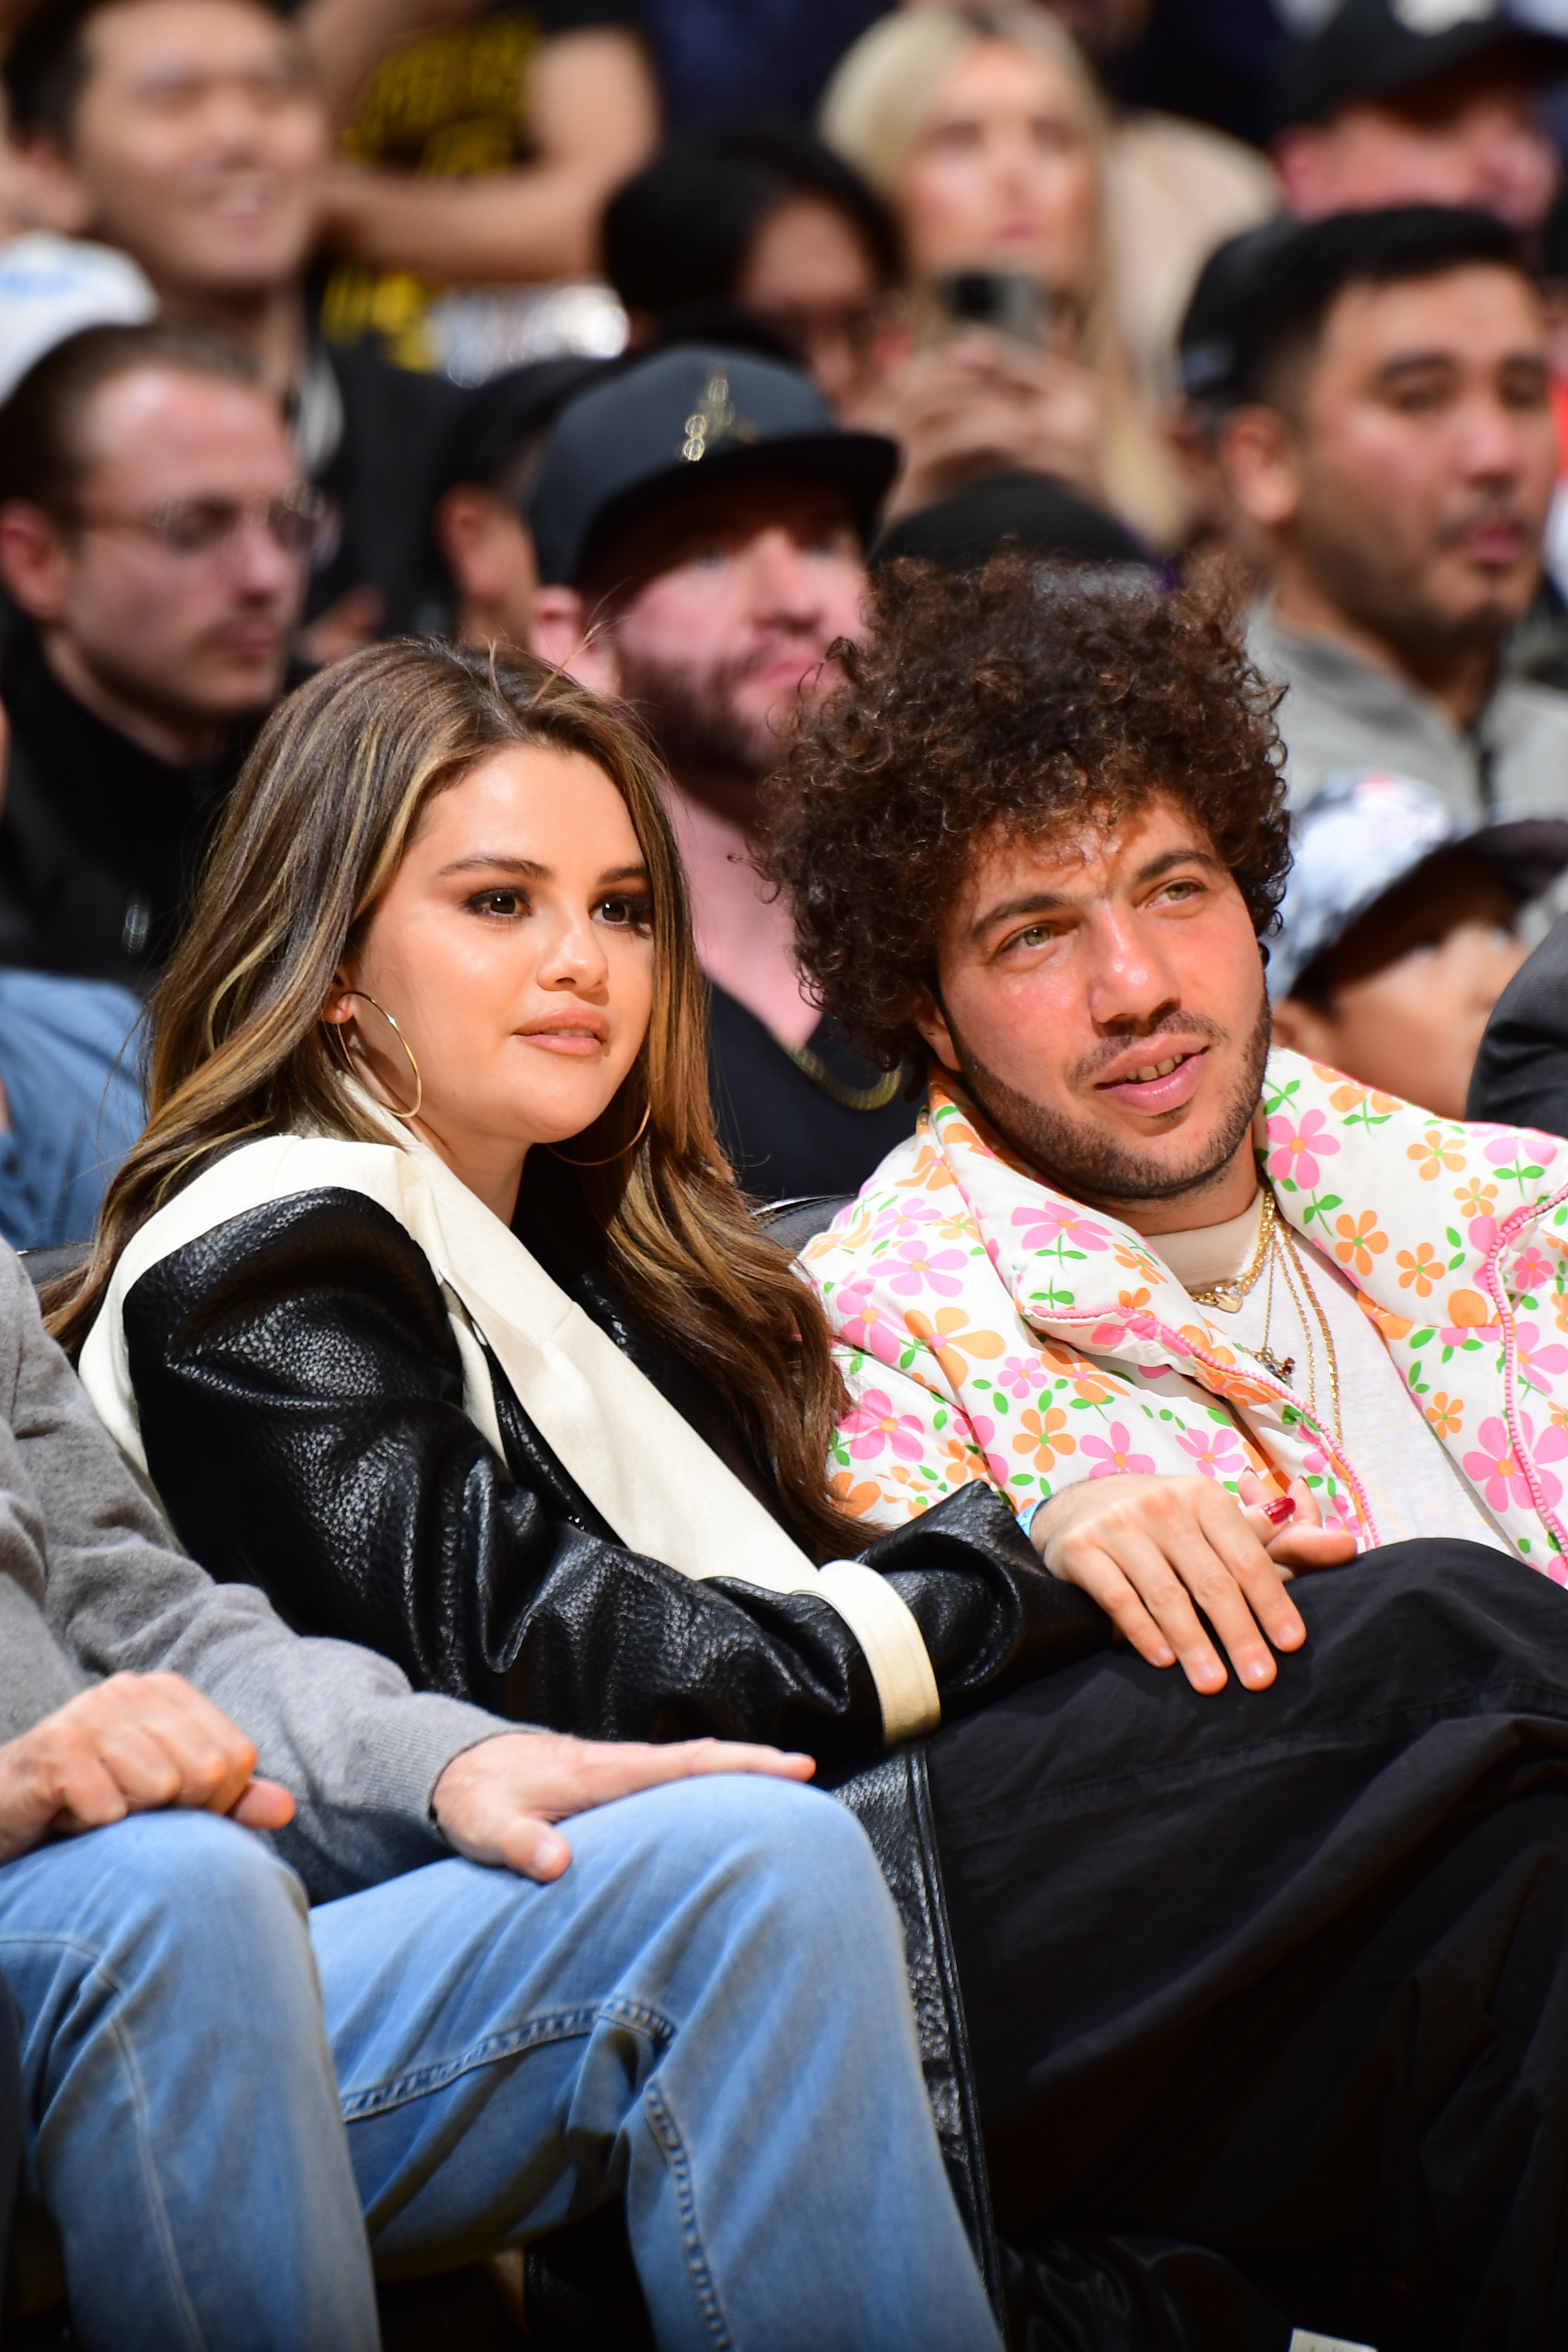 Close-up of Selena and Benny sitting together at a sports event